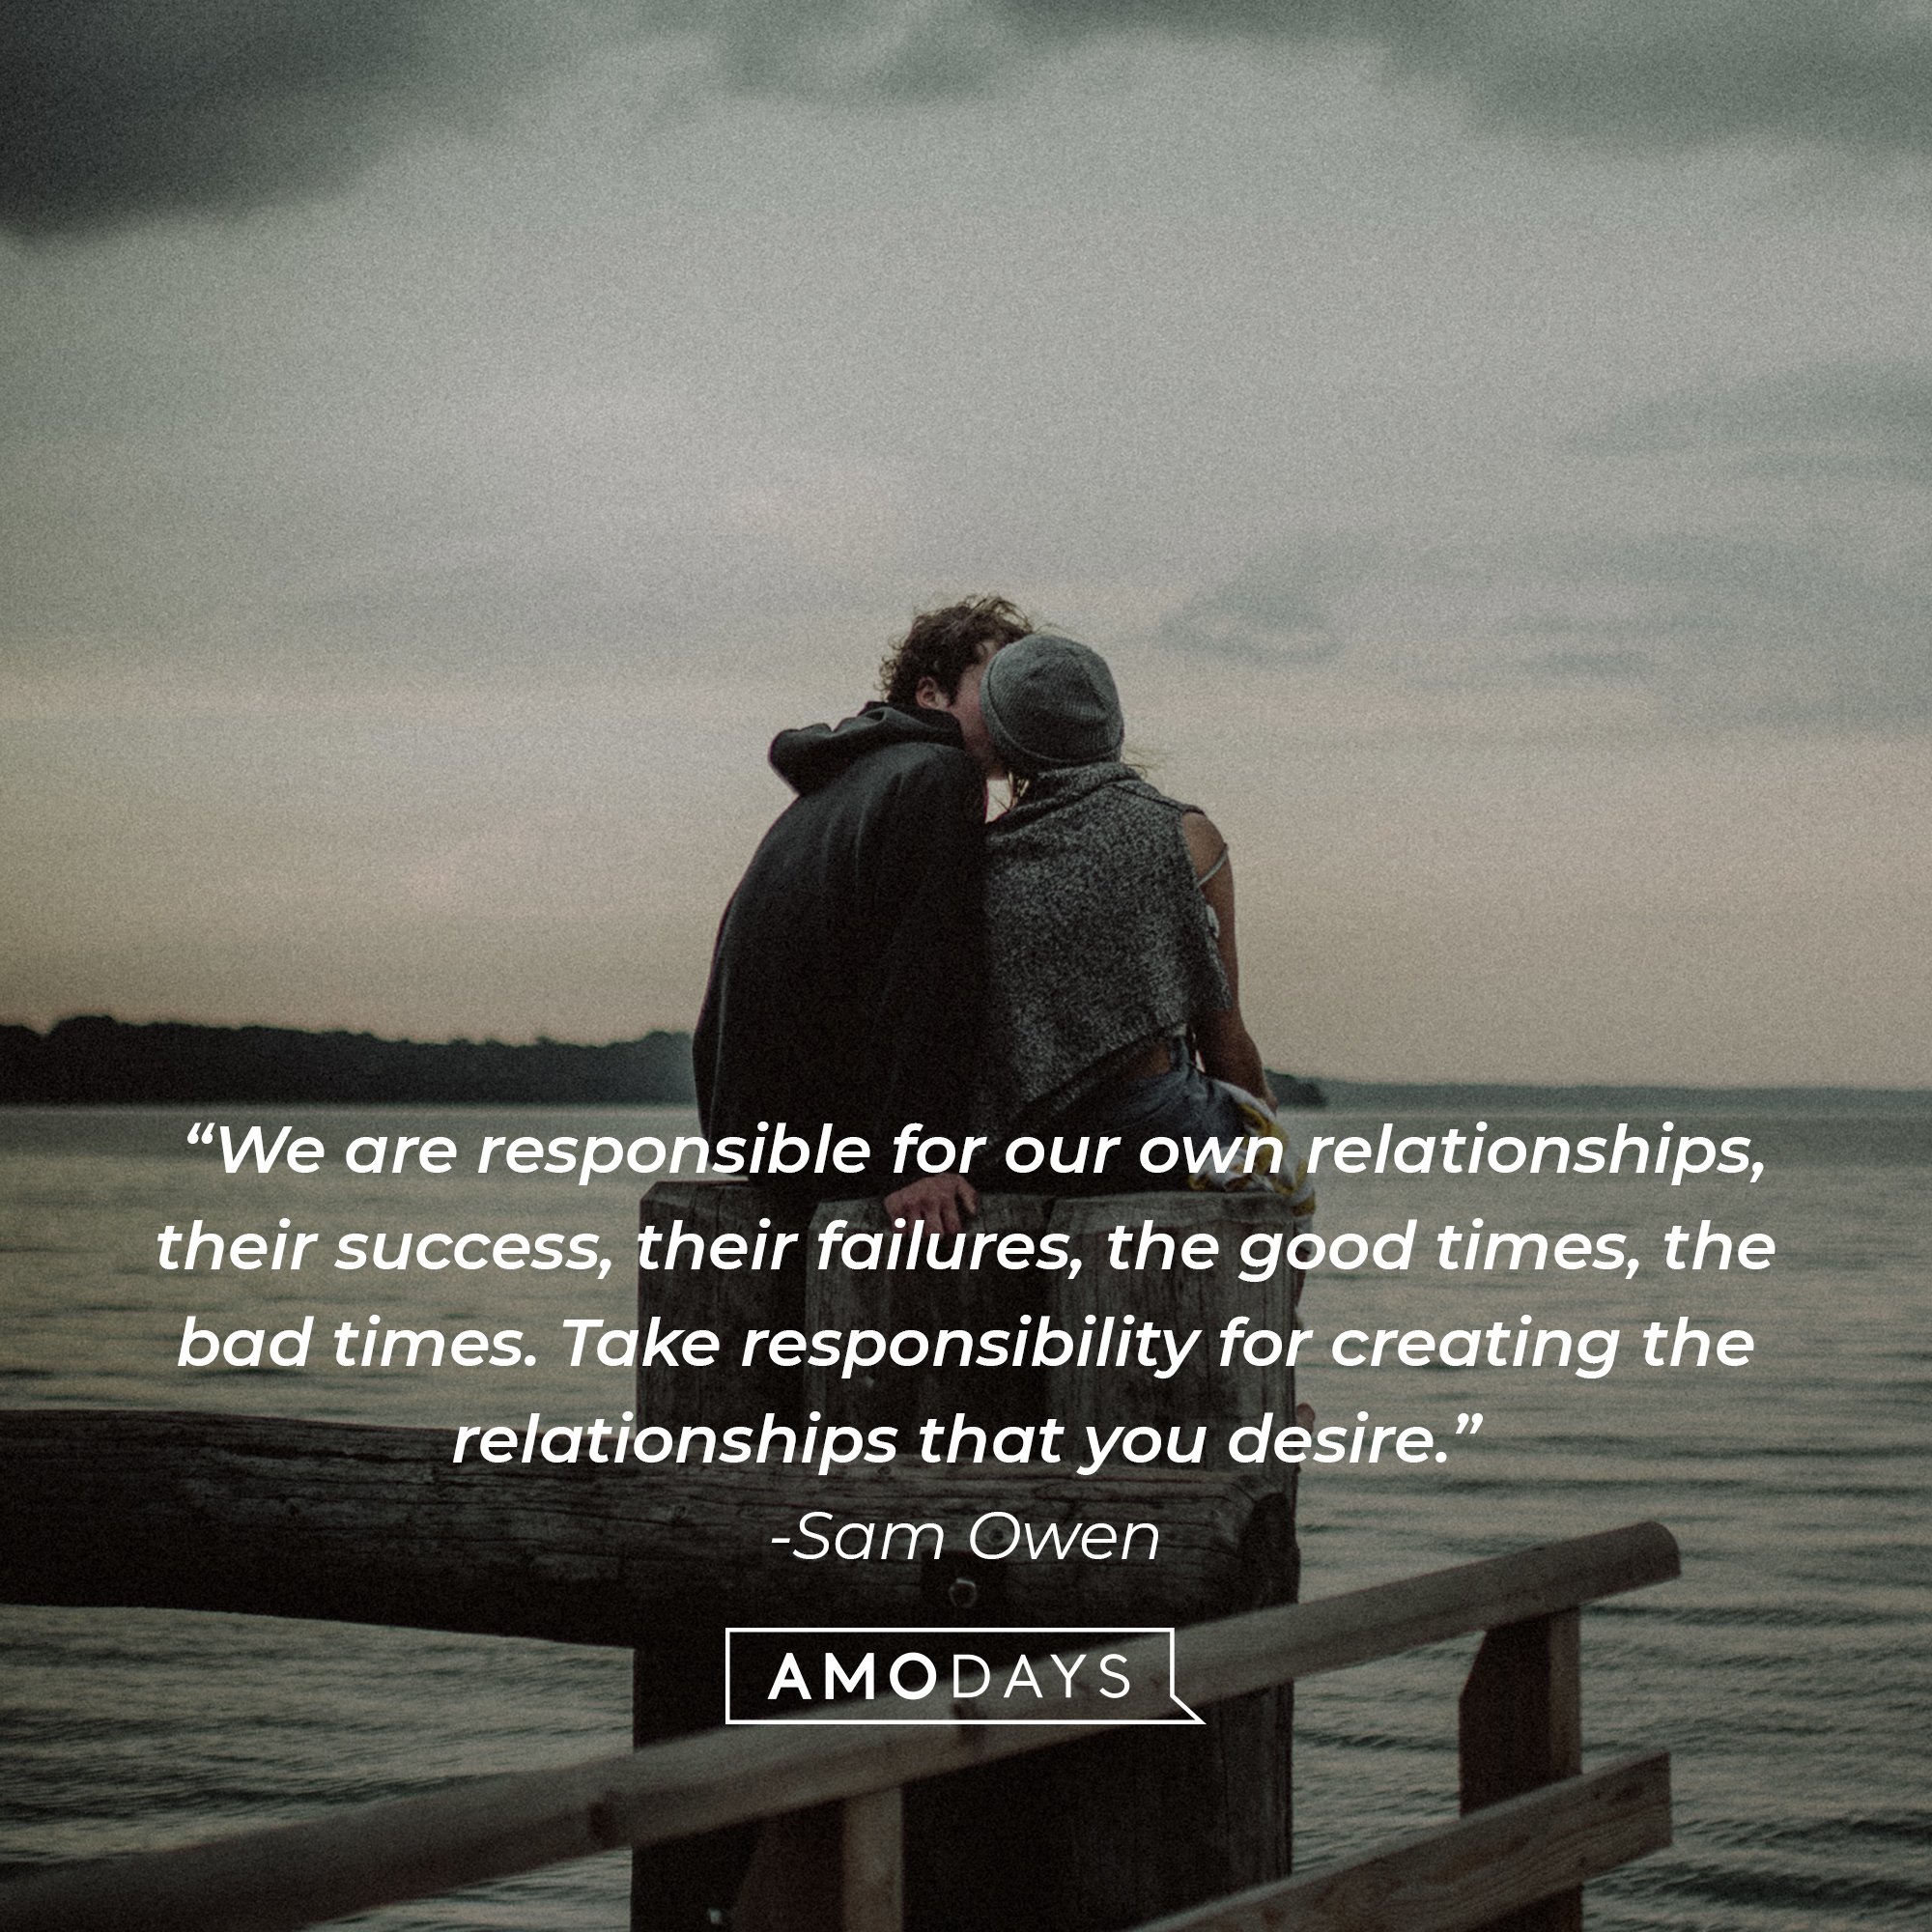 Sam Owen's quote: “We are responsible for our own relationships, their success, their failures, the good times, the bad times. Take responsibility for creating the relationships that you desire.” | Image: AmoDays